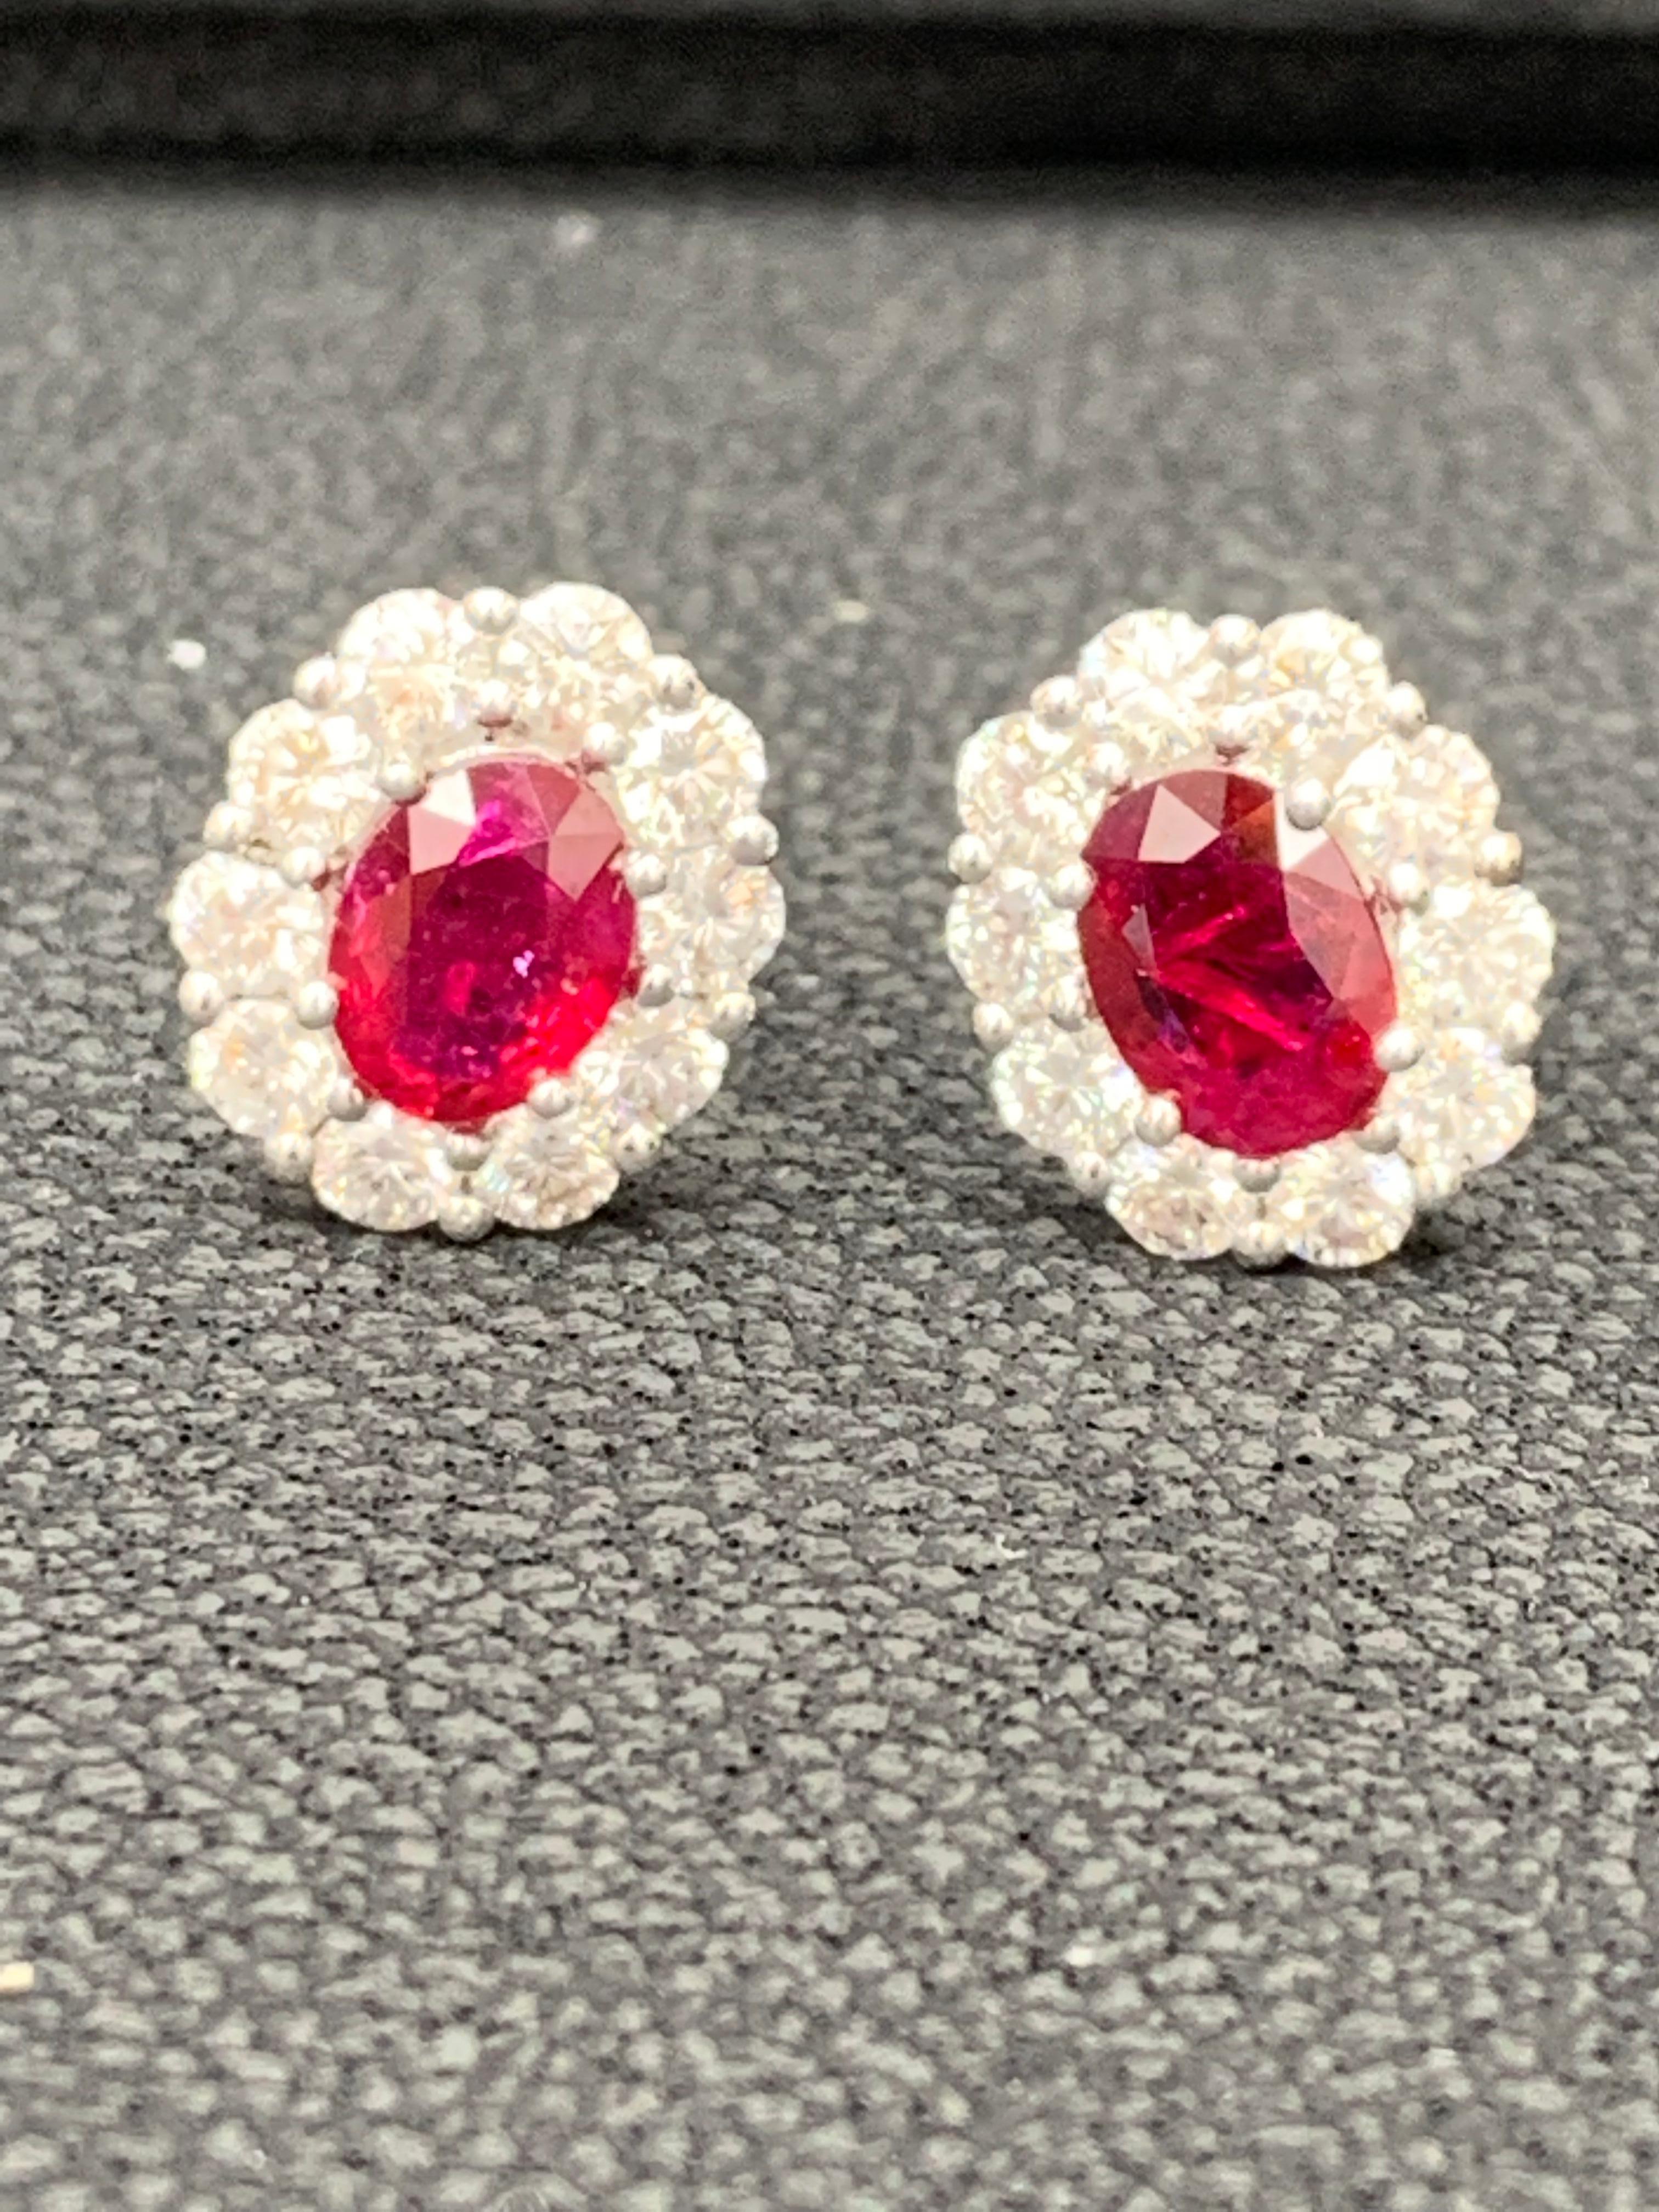 A simple pair of stud earrings showcasing 1.45 carats of oval cut red rubies, surrounded by a single row of 20 round brilliant diamonds weighing 1.35 carat. Made in 18 karat white gold.